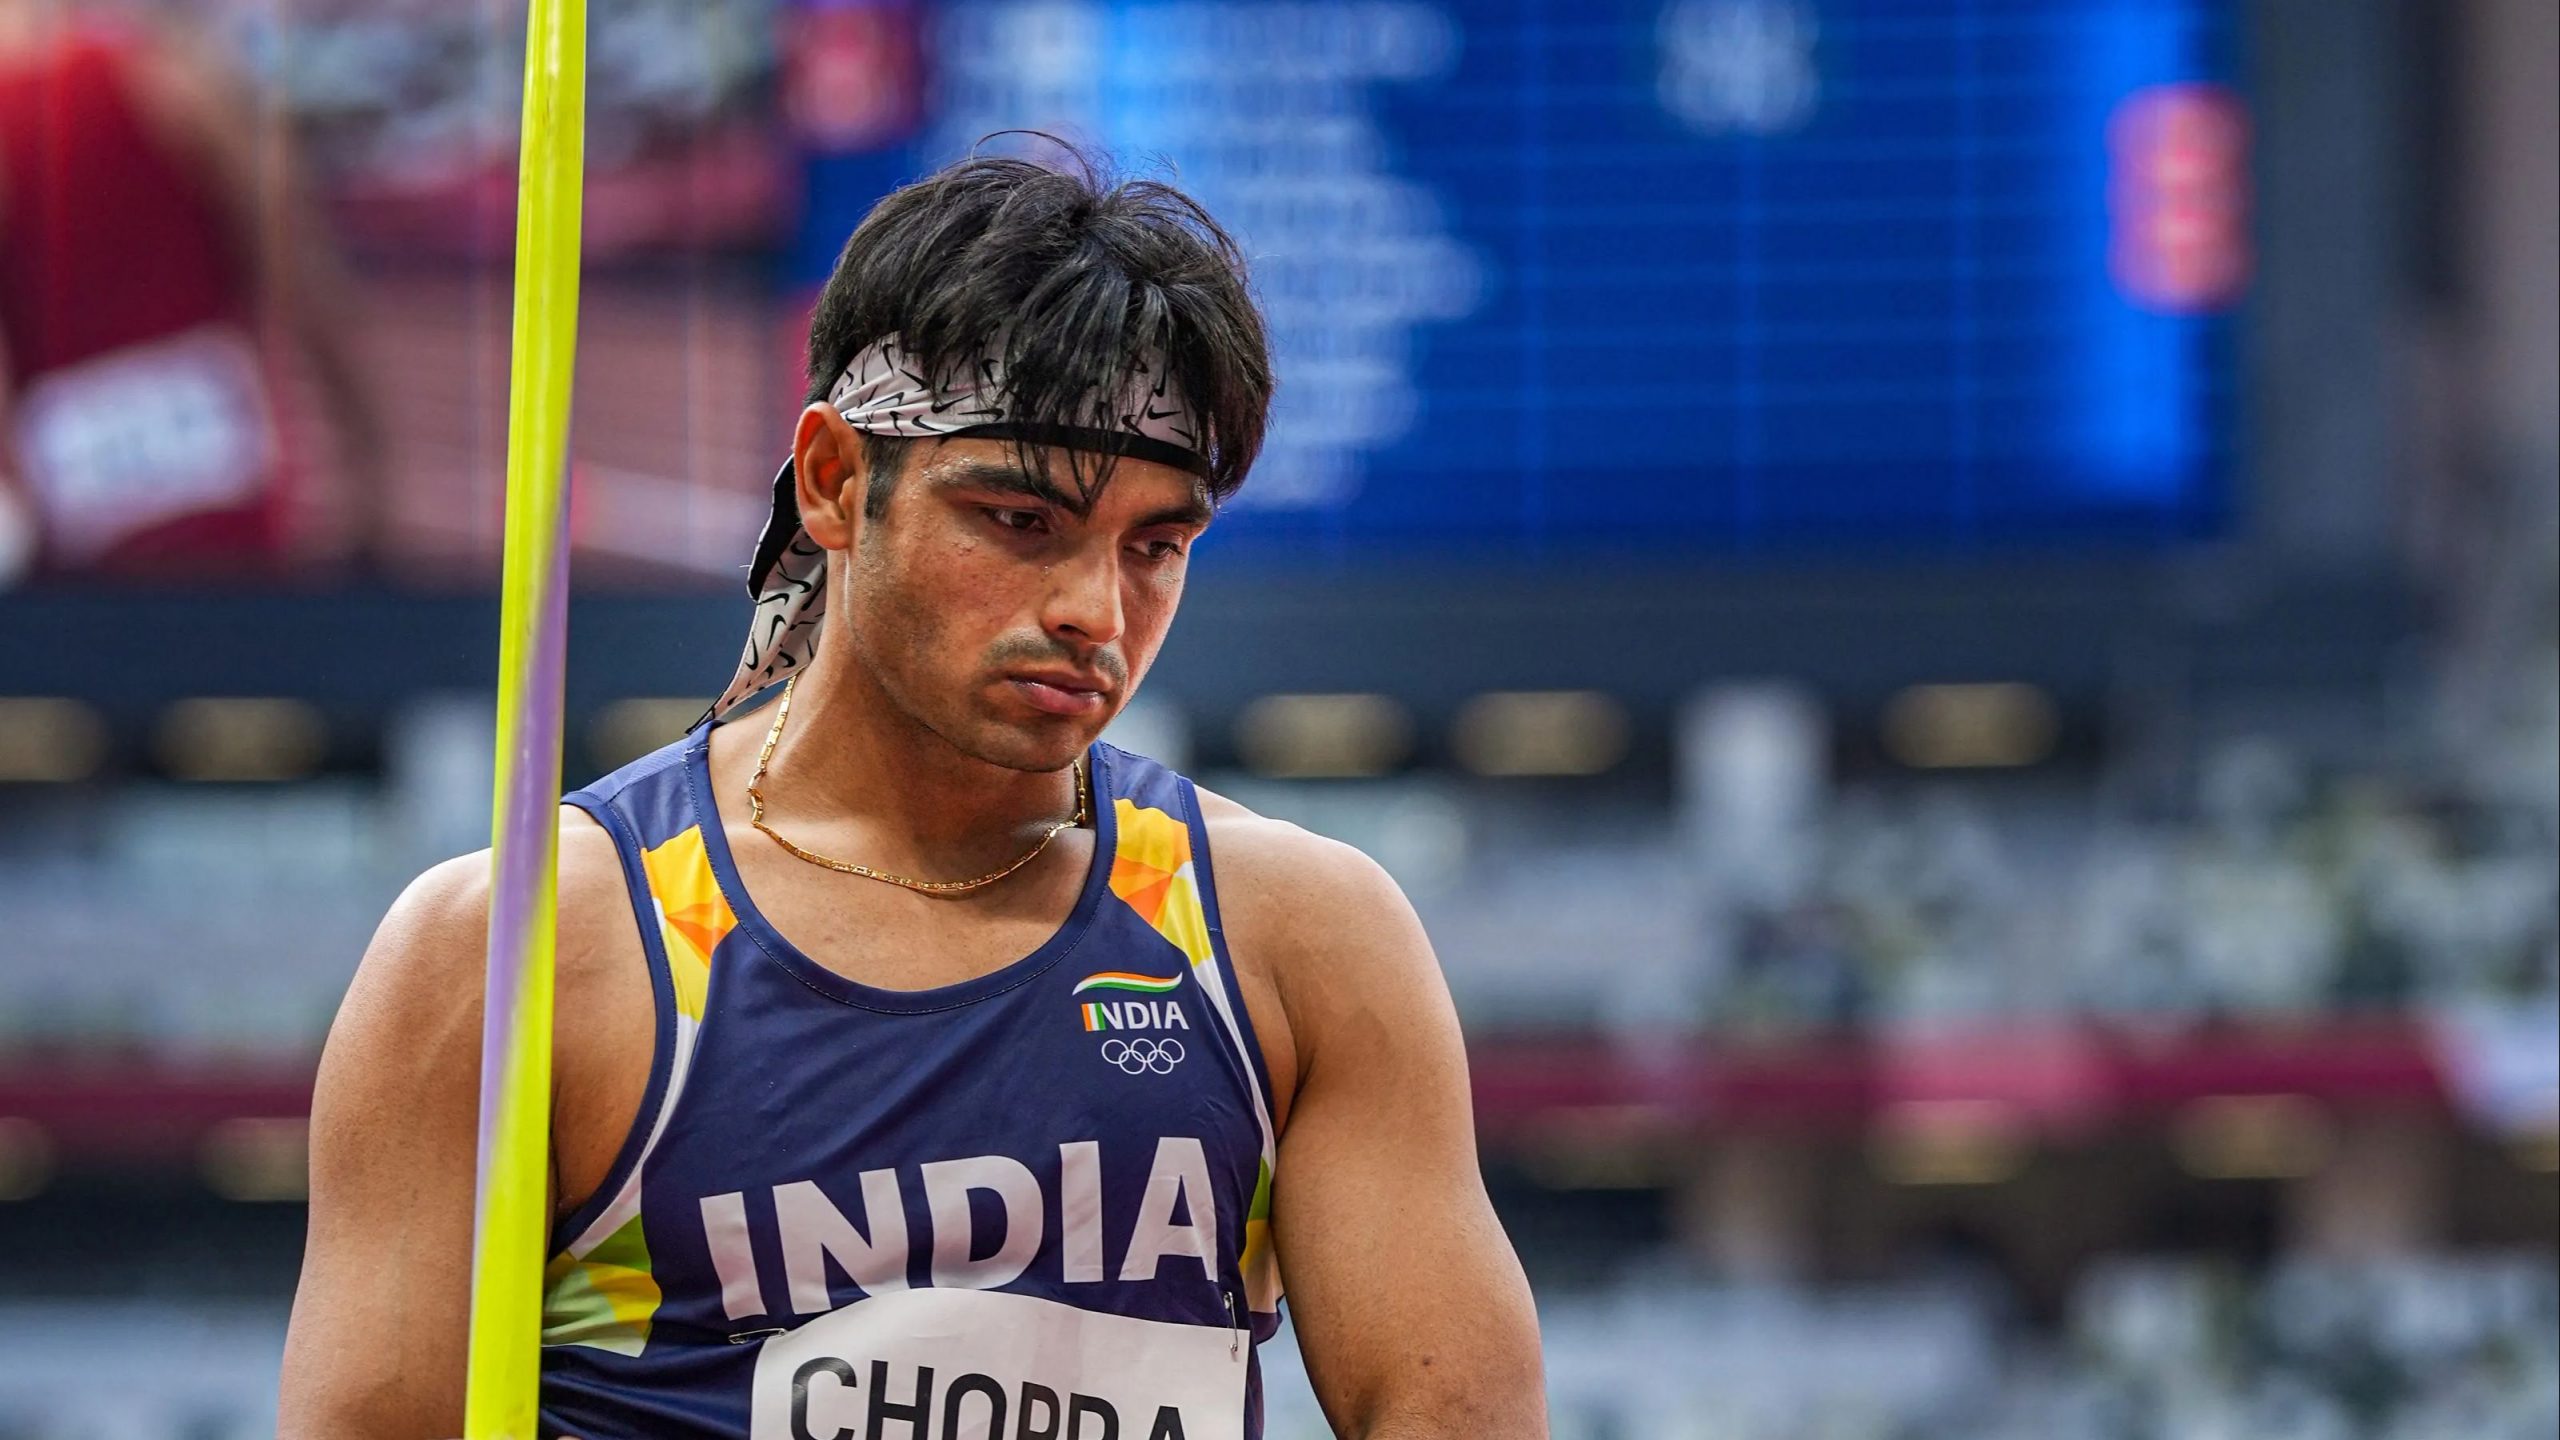 Olympic gold medalist Neeraj Chopra nominated for 2022 Laureus World Breakthrough of the Year Award